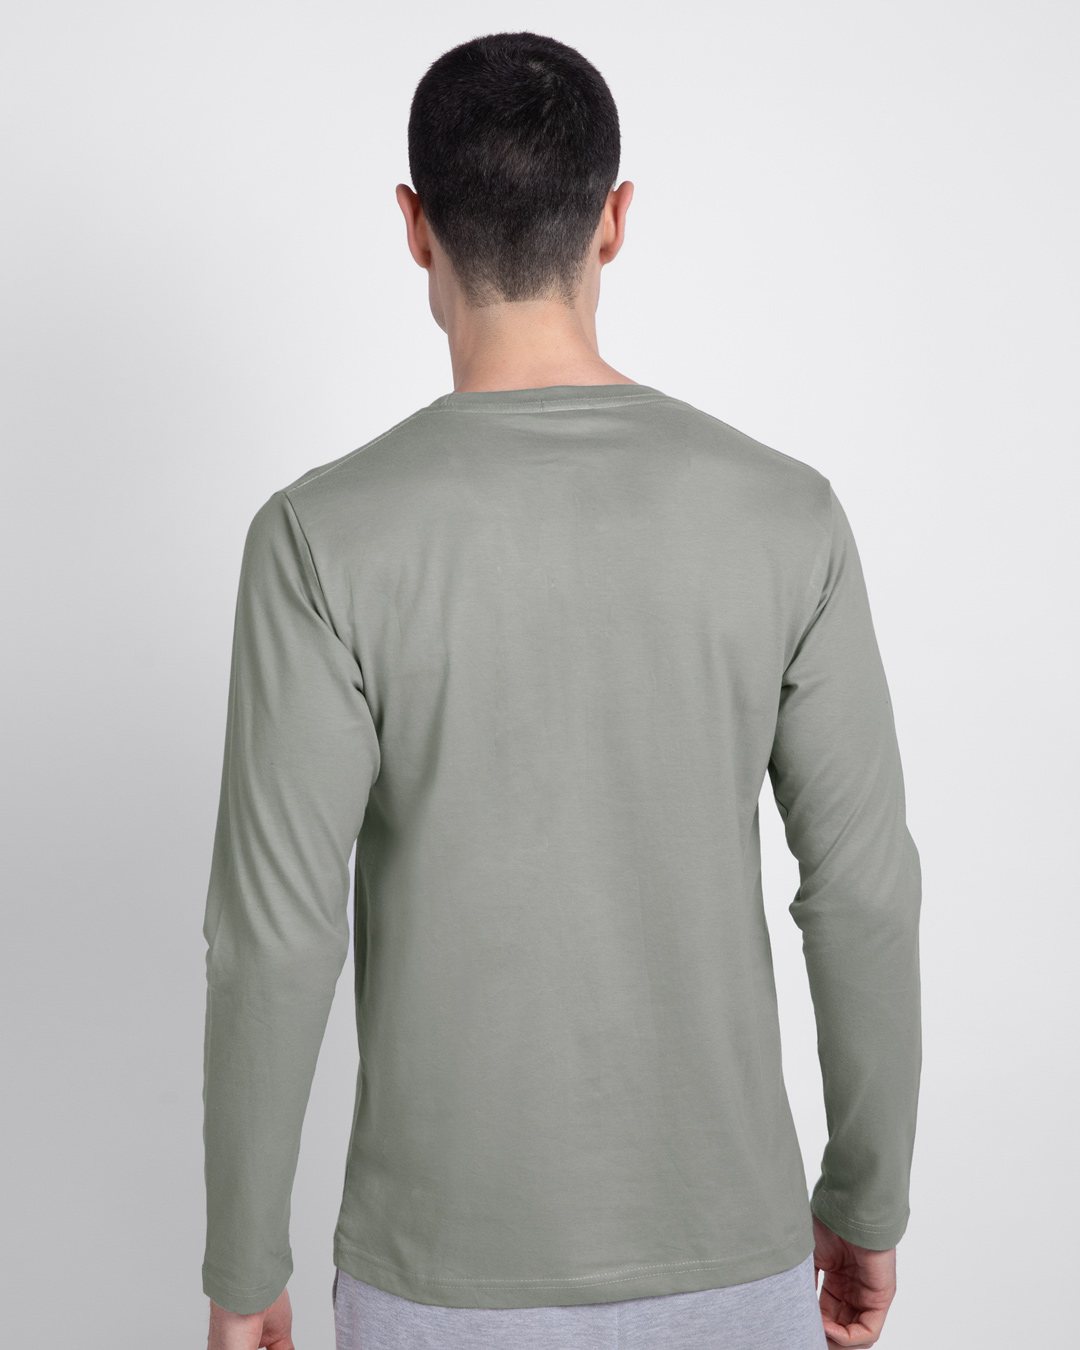 Shop Shareef by nature Full Sleeves T-Shirt-Back